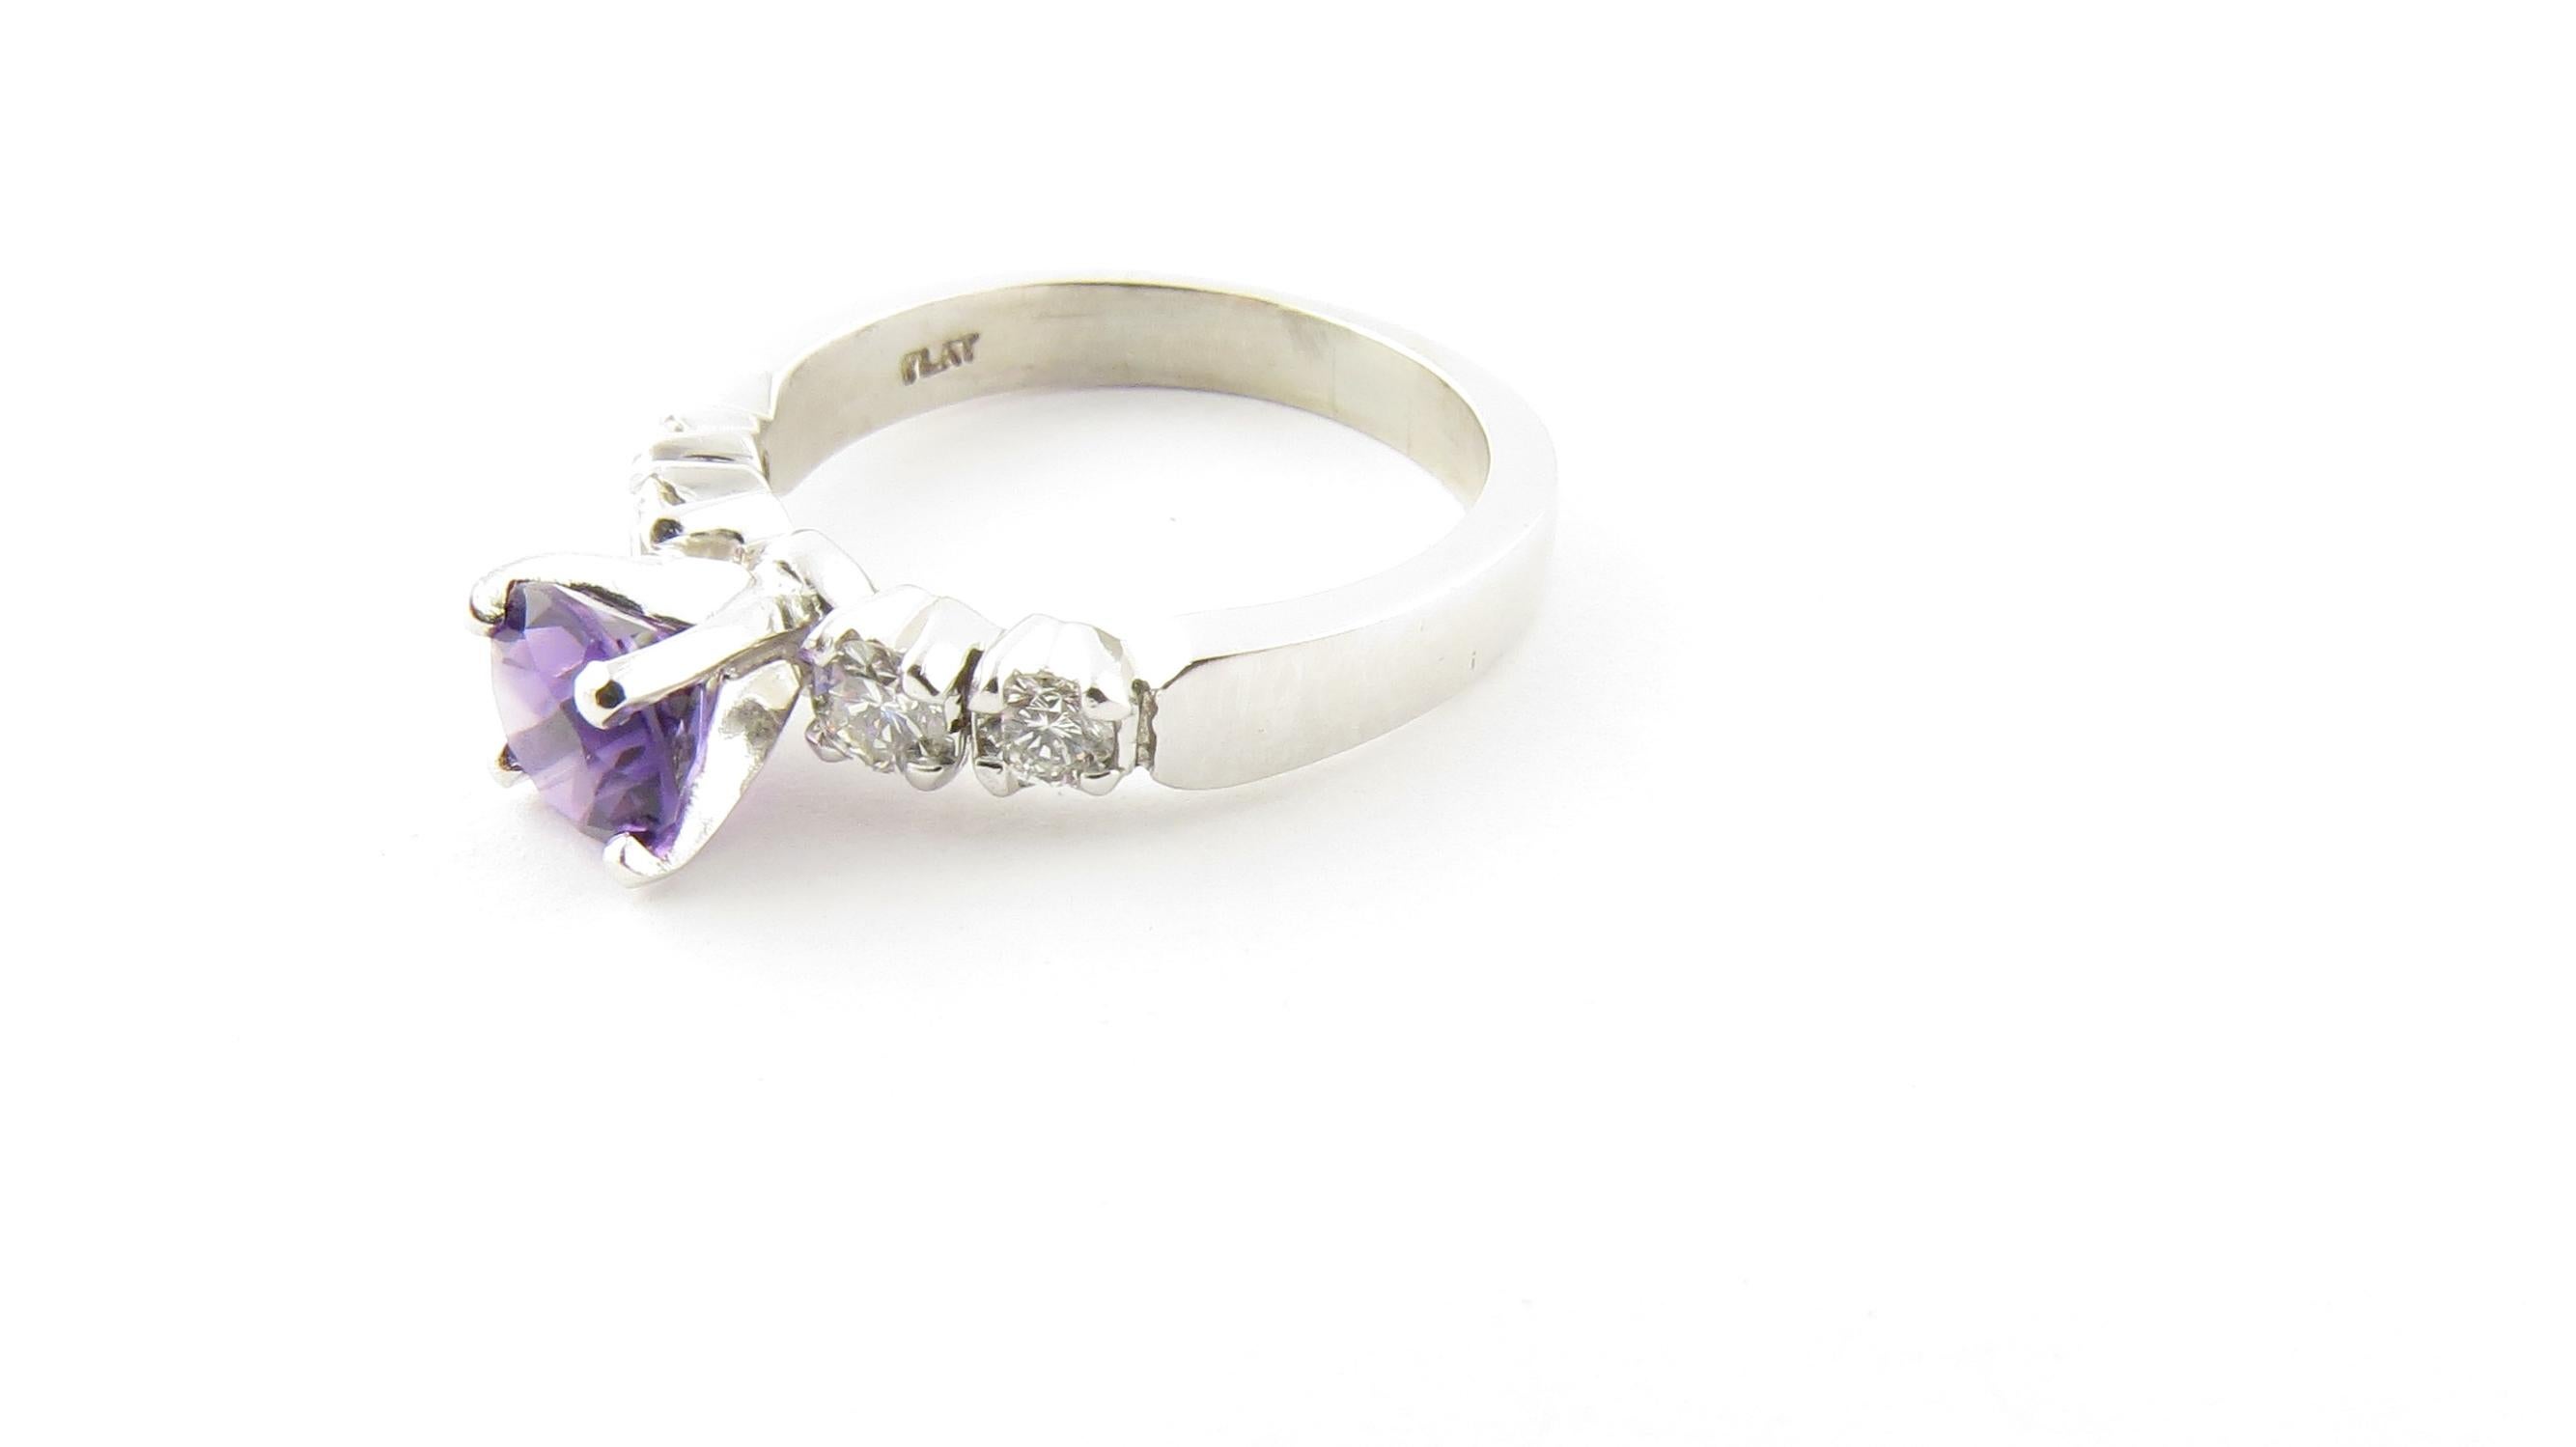 Vintage Platinum Amethyst and Diamond Ring Size 5

This stunning ring features one round genuine amethyst (6 mm) and four round brilliant cut diamonds set in elegant platinum. Shank measures 2.5 mm.

Approximate total diamond weight: .28